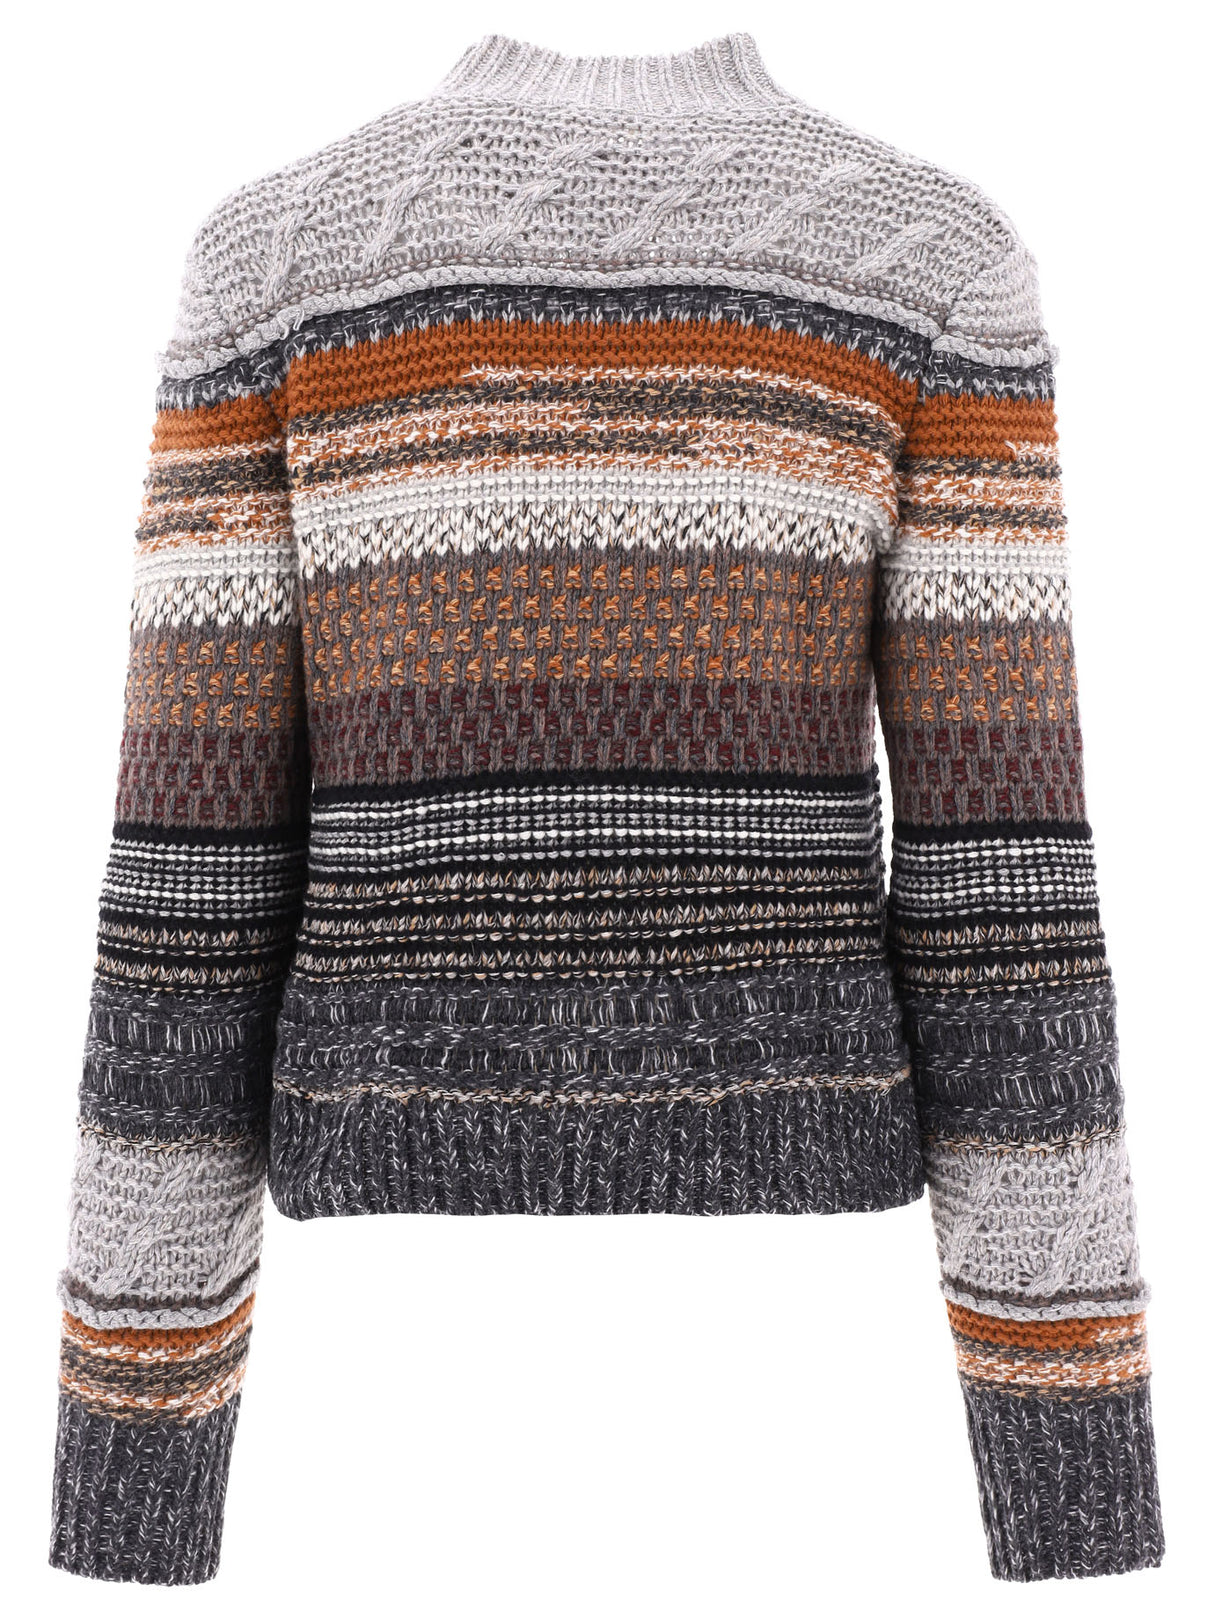 CHLOÉ Striped Cashmere and Wool Pullover for Women - FW22 Collection